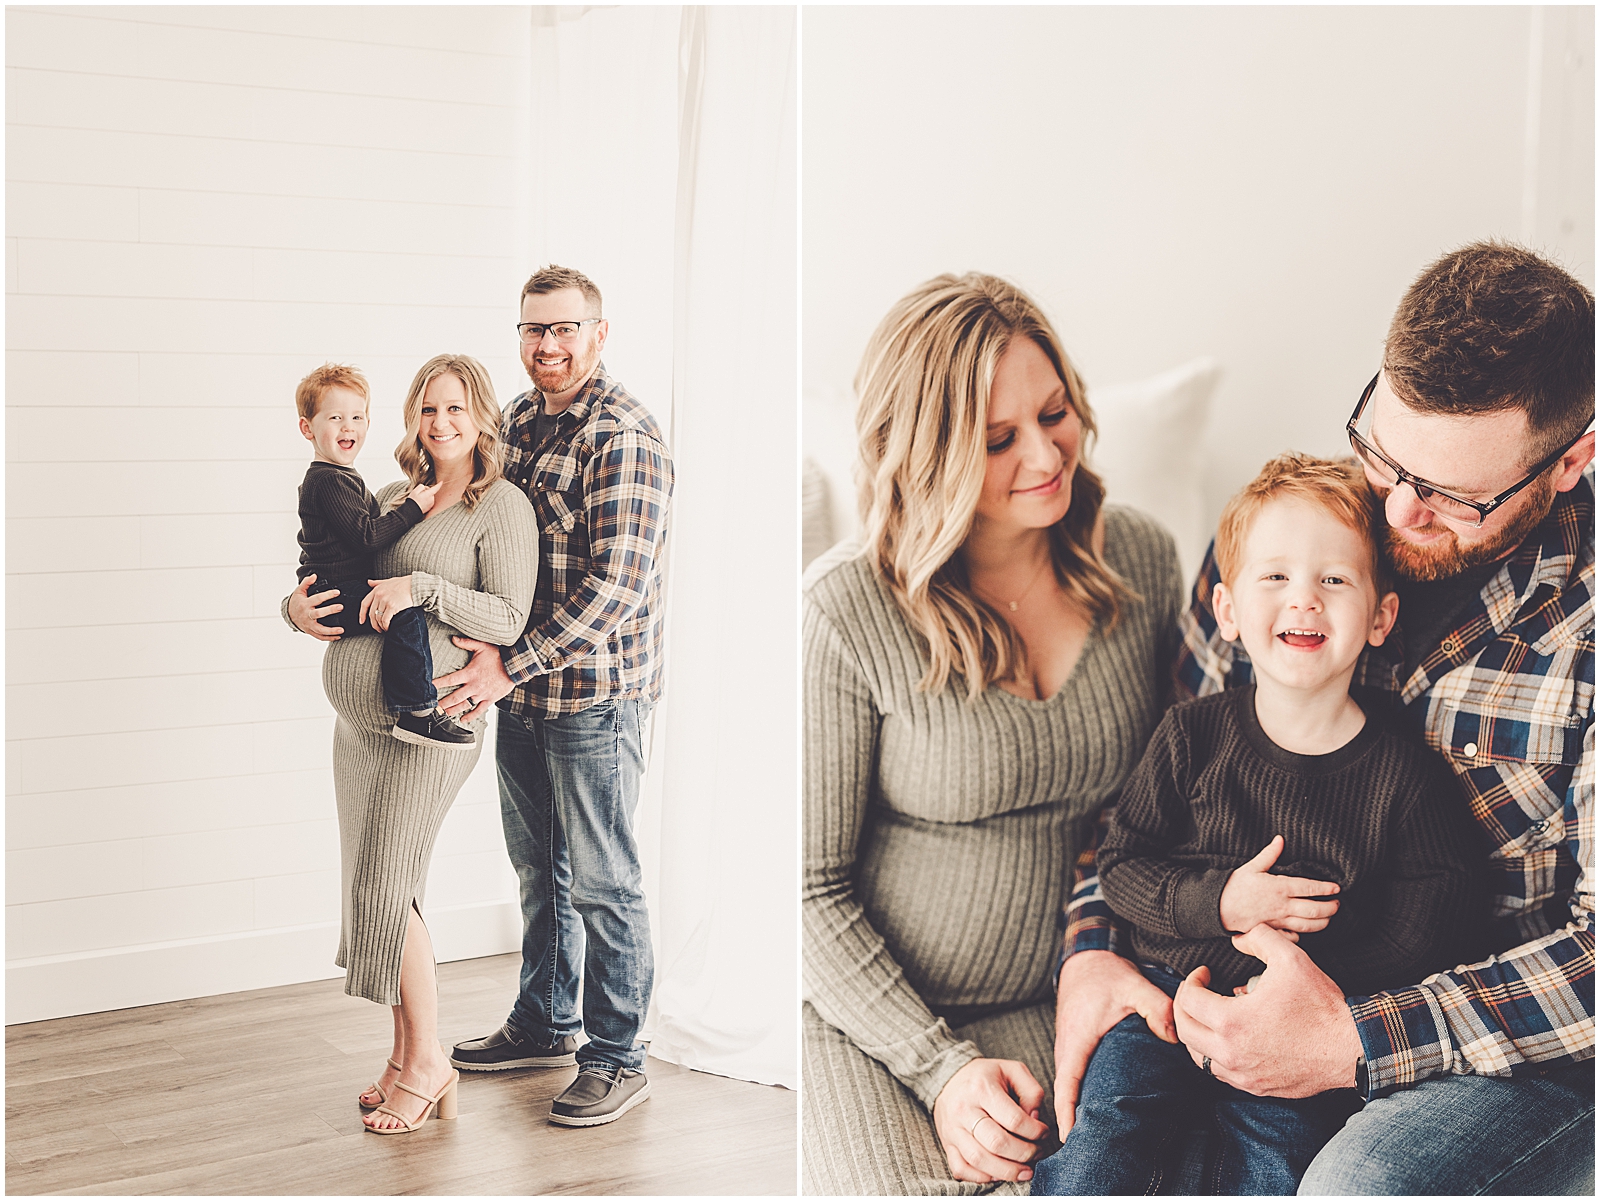 Studio maternity and family photographer in Kankakee with Iroquois County and Kankakee County family photographer Kara Evans Photographer.